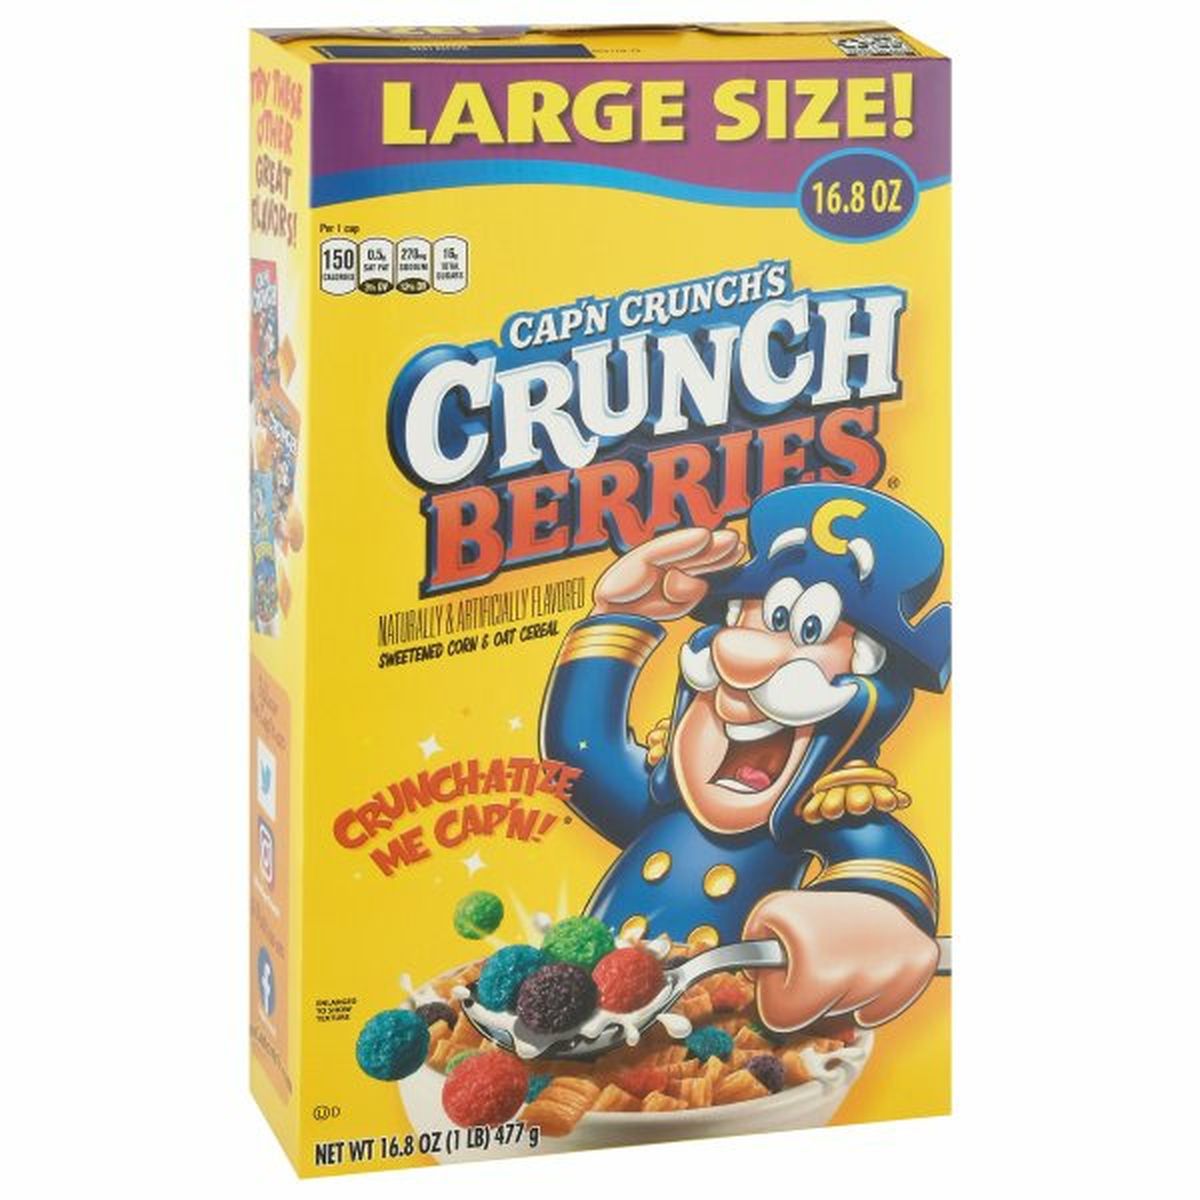 Calories in Cap'N Crunch Crunch Berries Sweetened Corn & Oat Cereal, Large Size